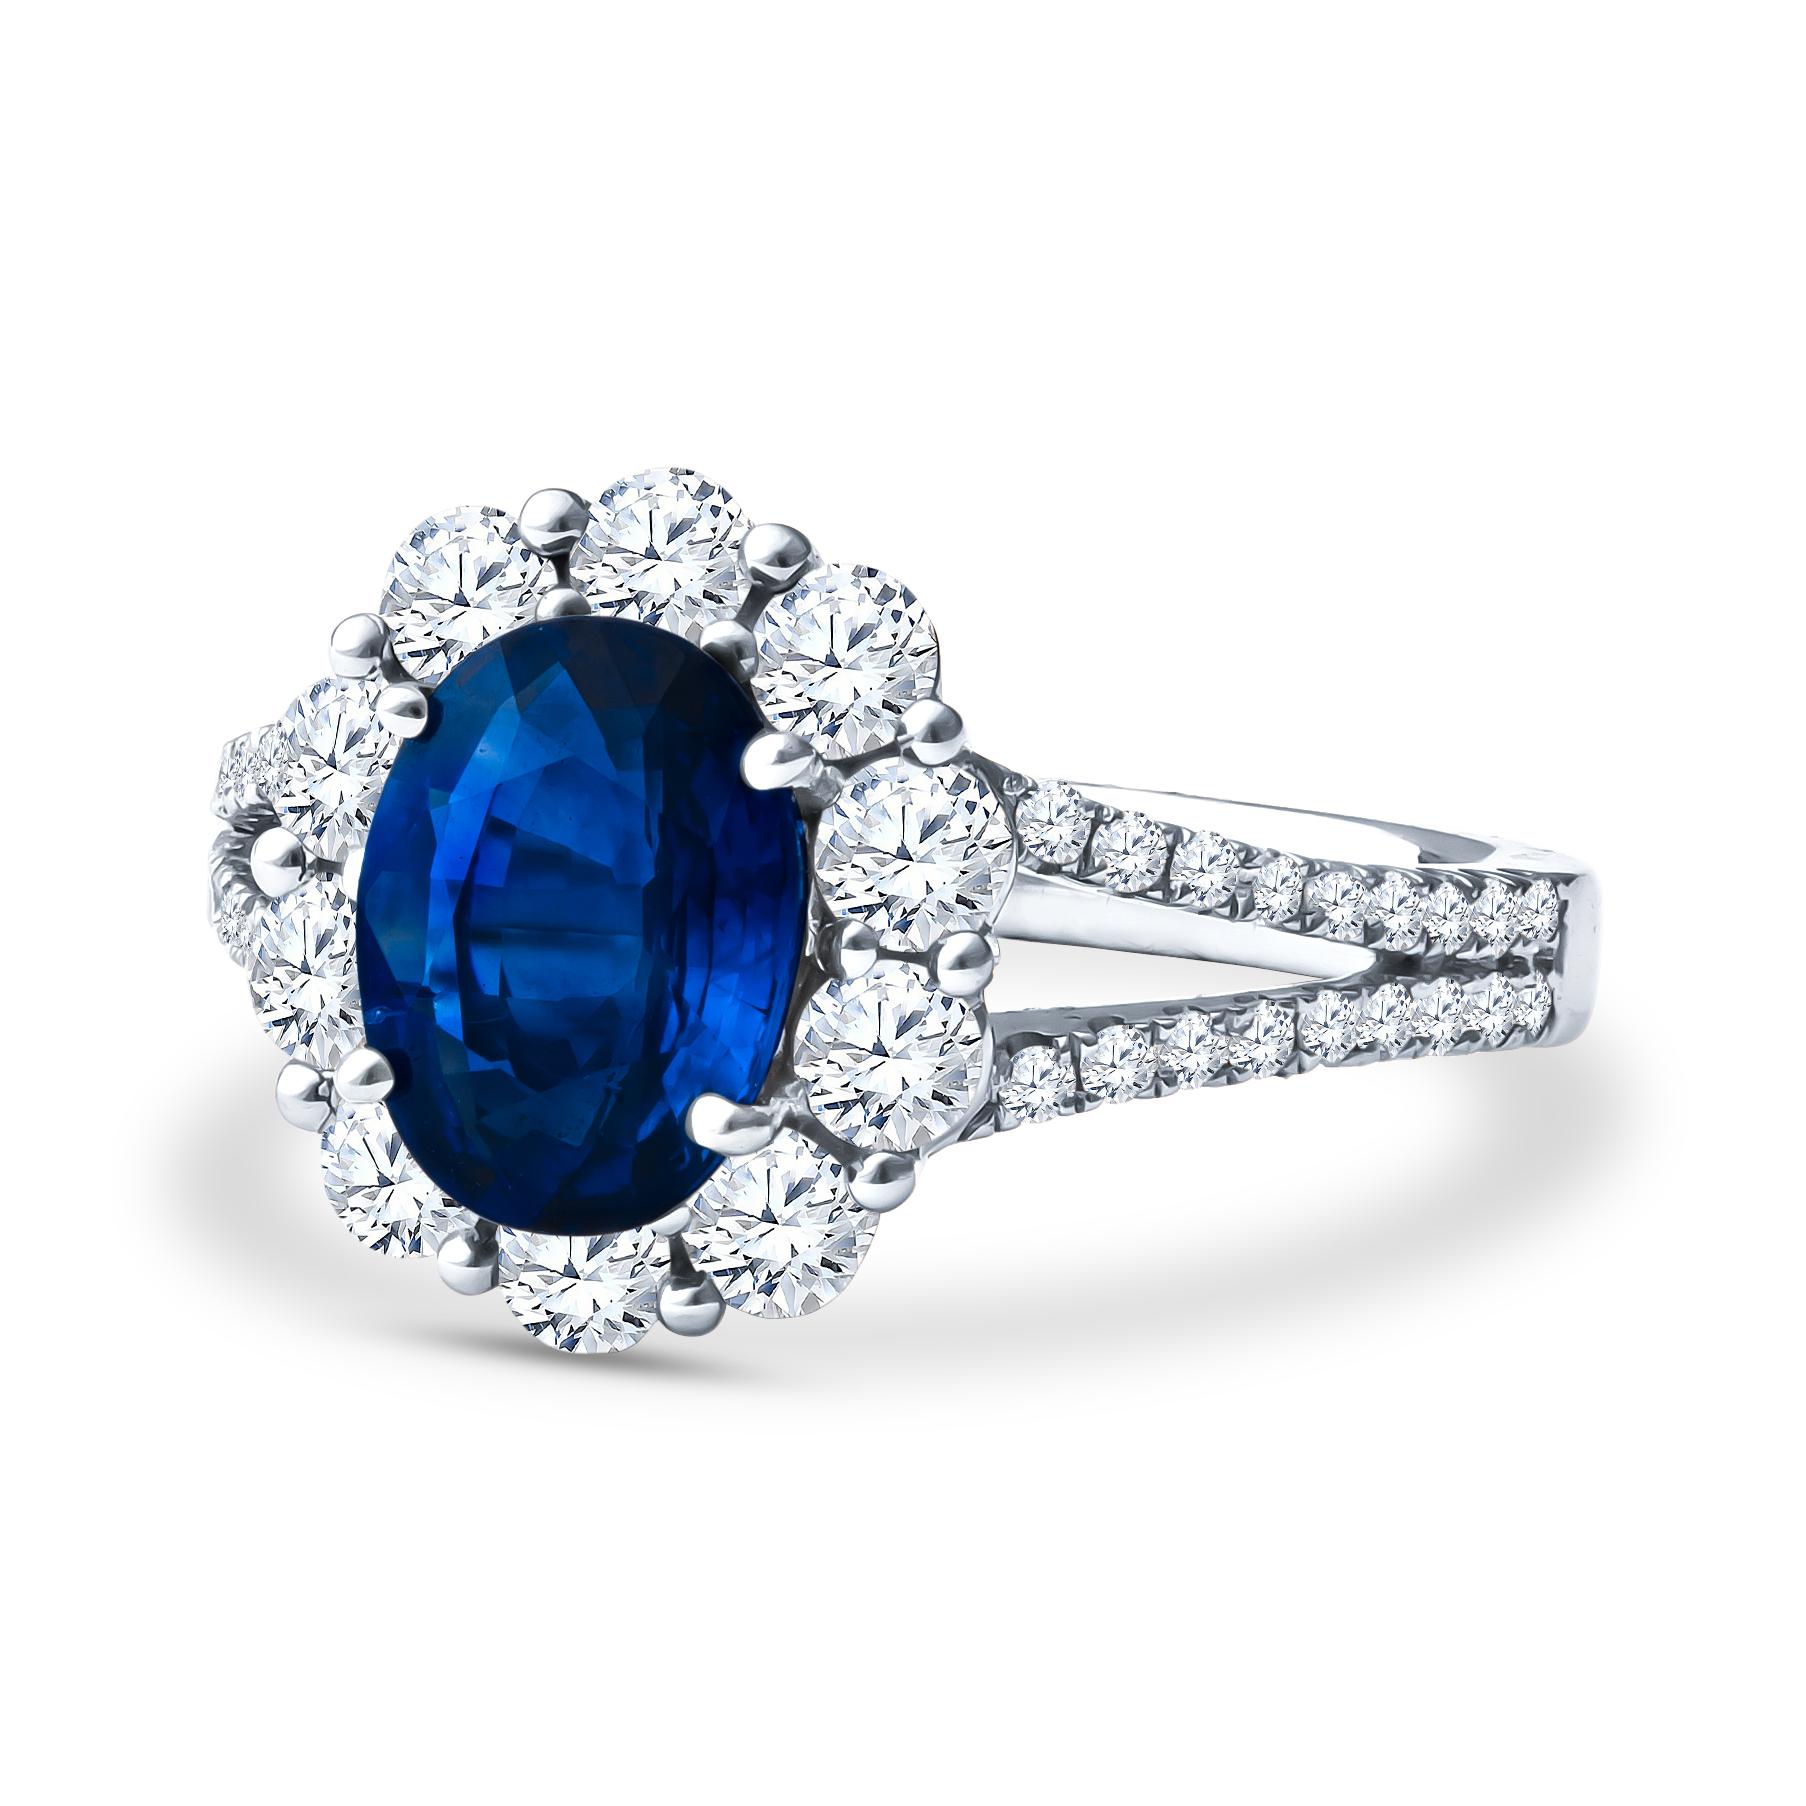 This stunning piece showcases a 1.90ct oval blue sapphire centerstone that is surrounded by 1.12ct total weight in round diamonds forming the halo and going down the split shank of the 18kt white gold ring. The ring is a beautiful floral shape,